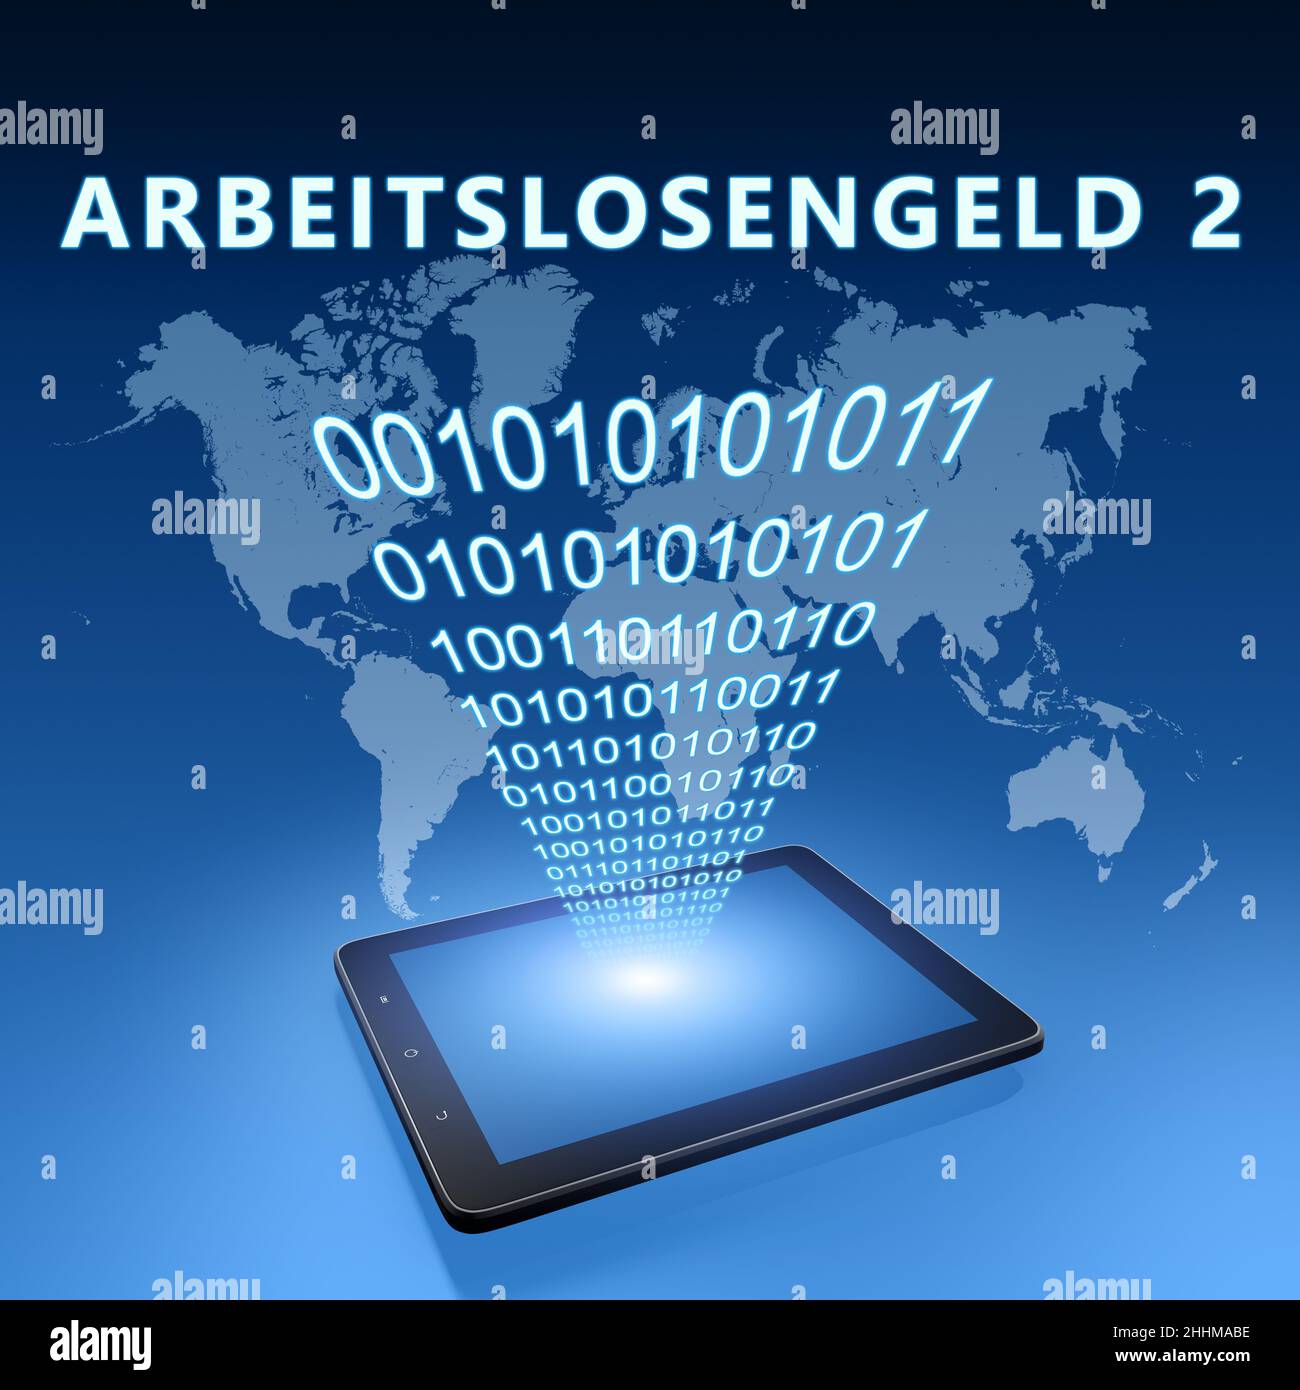 Arbeitslosengeld 2 - german word for unemployment benefit or dole money - text concept with tablet computer on blue wolrd map background - 3d render i Stock Photo